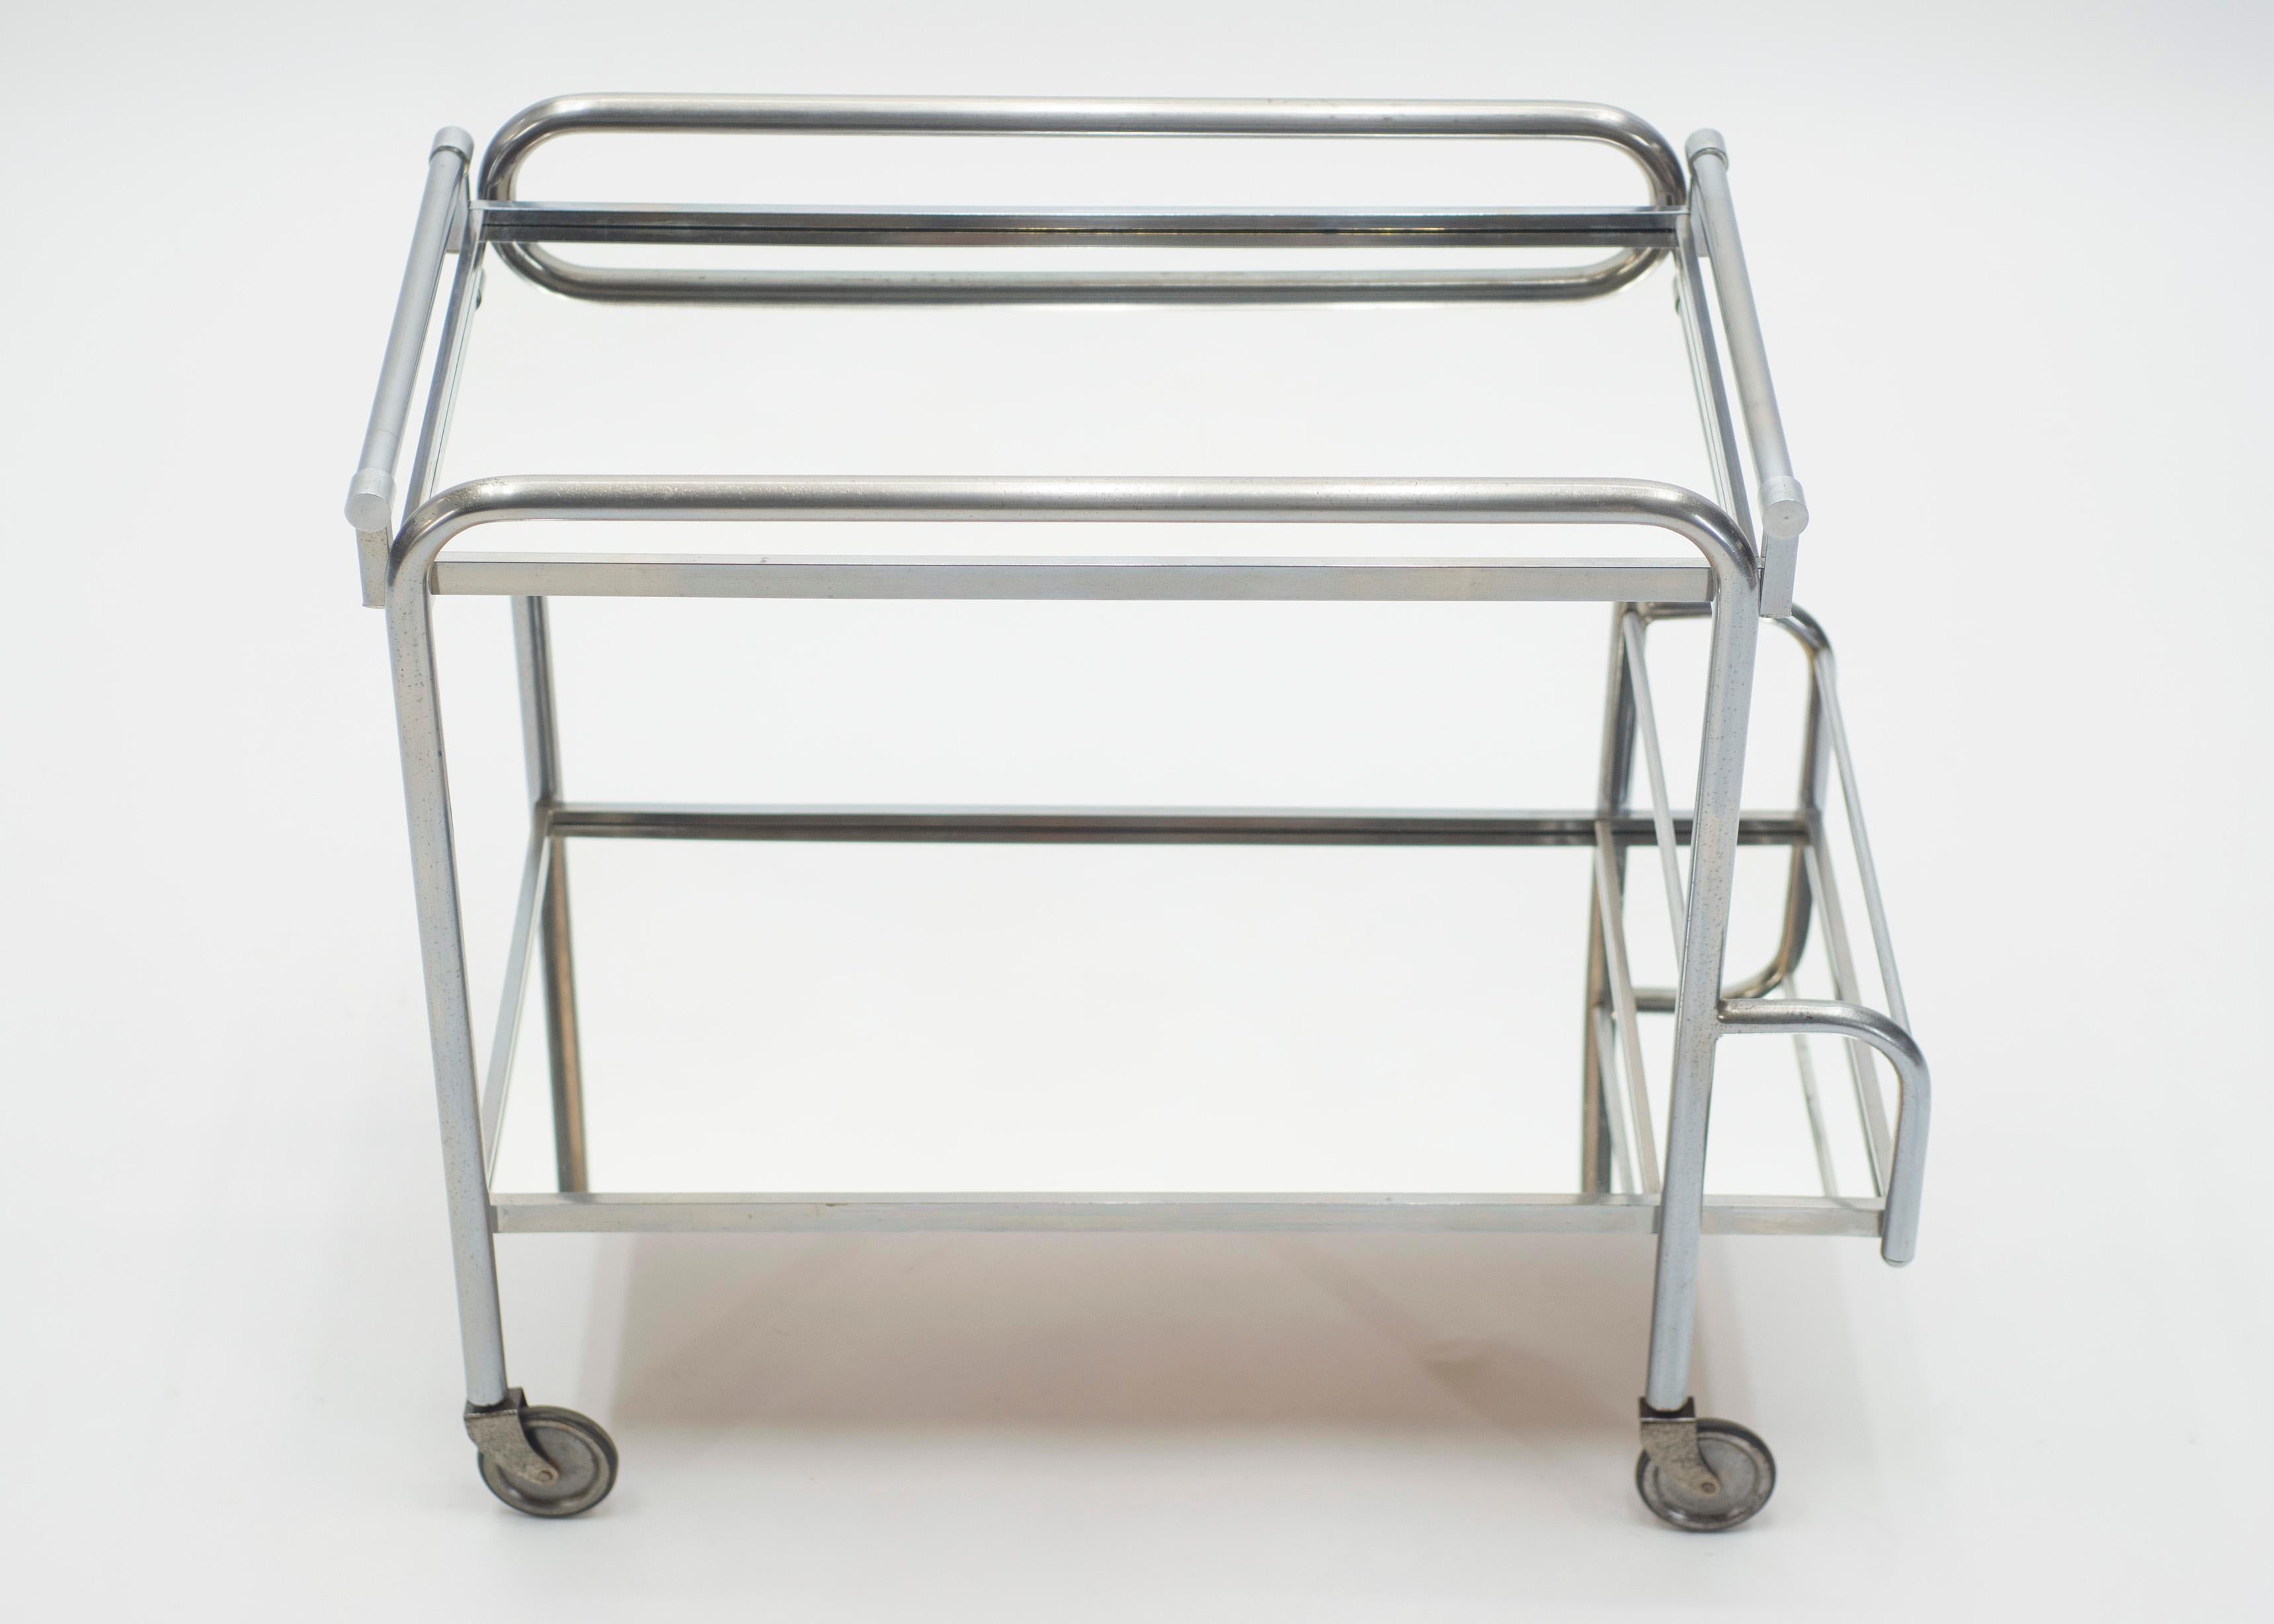 This chic bar cart from the 1930s carries with it the elegant mood of the Art Deco period, especially with its bold, modern use of high-quality metals and mirror. It’s set on functioning wheels and has 2/3 mirrored surfaces on which to store your